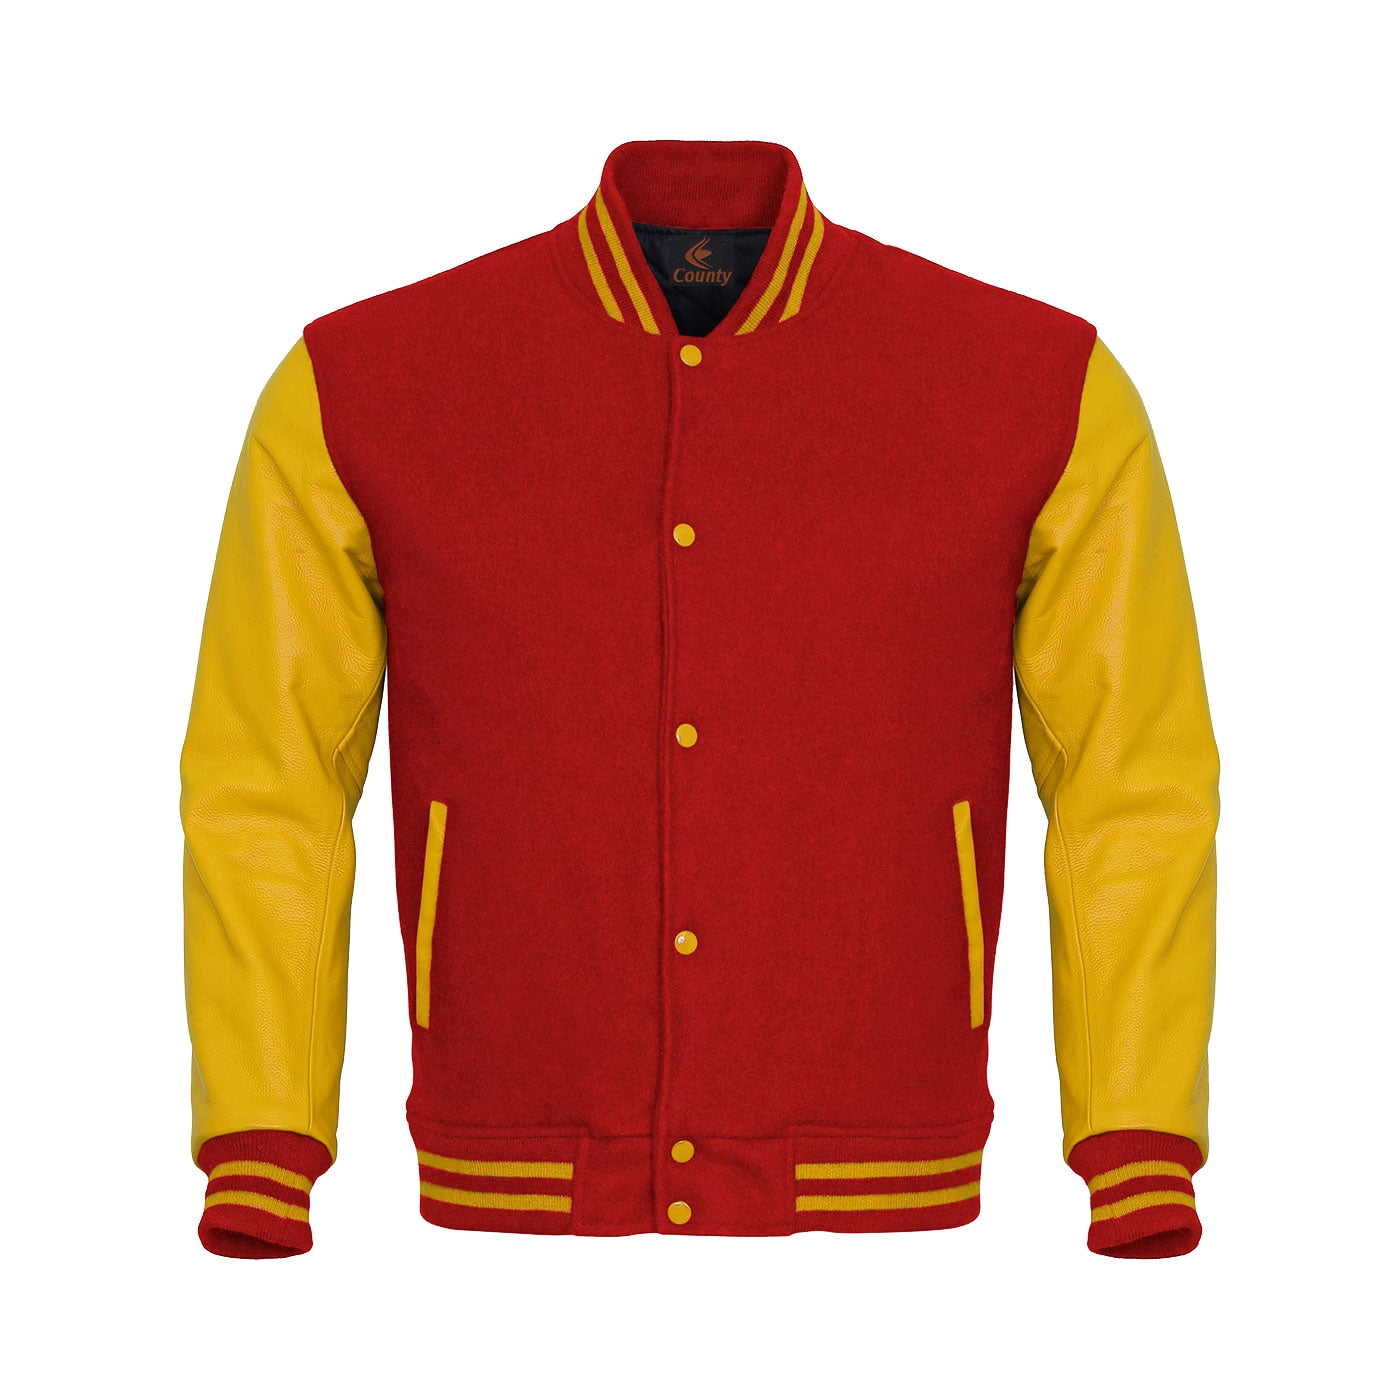 Luxury Red Body and Yellow Leather Sleeves Varsity College Jacket